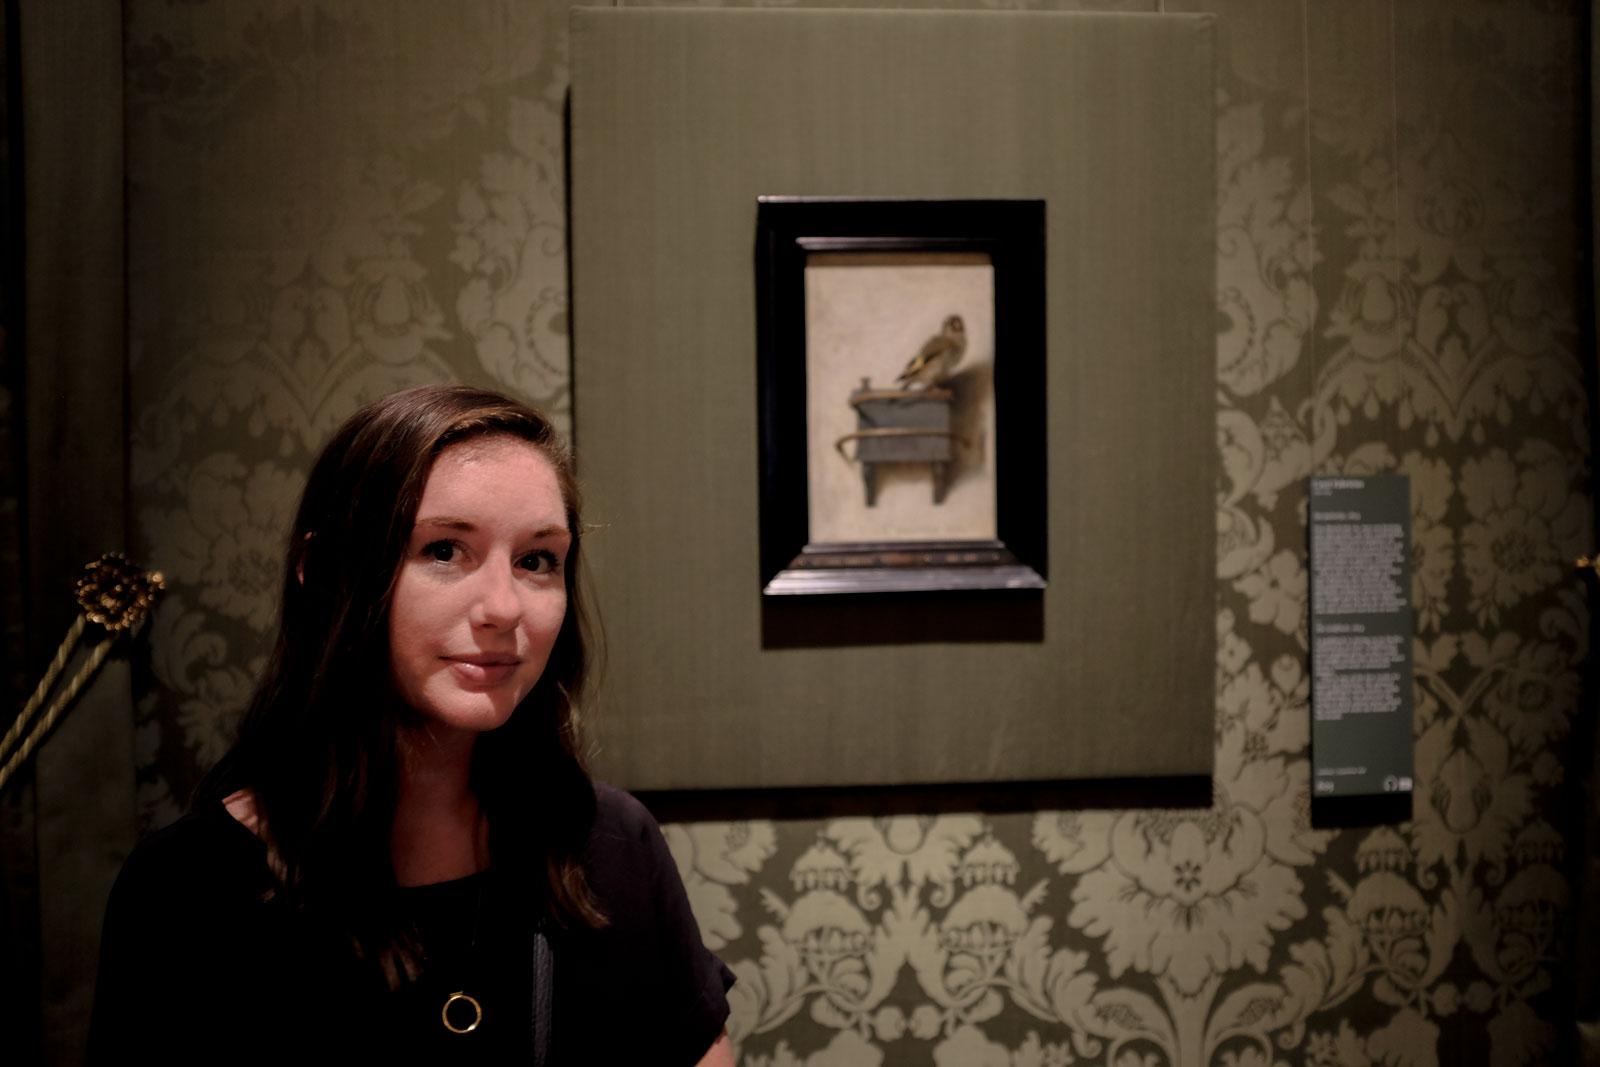 Alyssa stands in front of the Goldfinch painting at the Mauritshuis